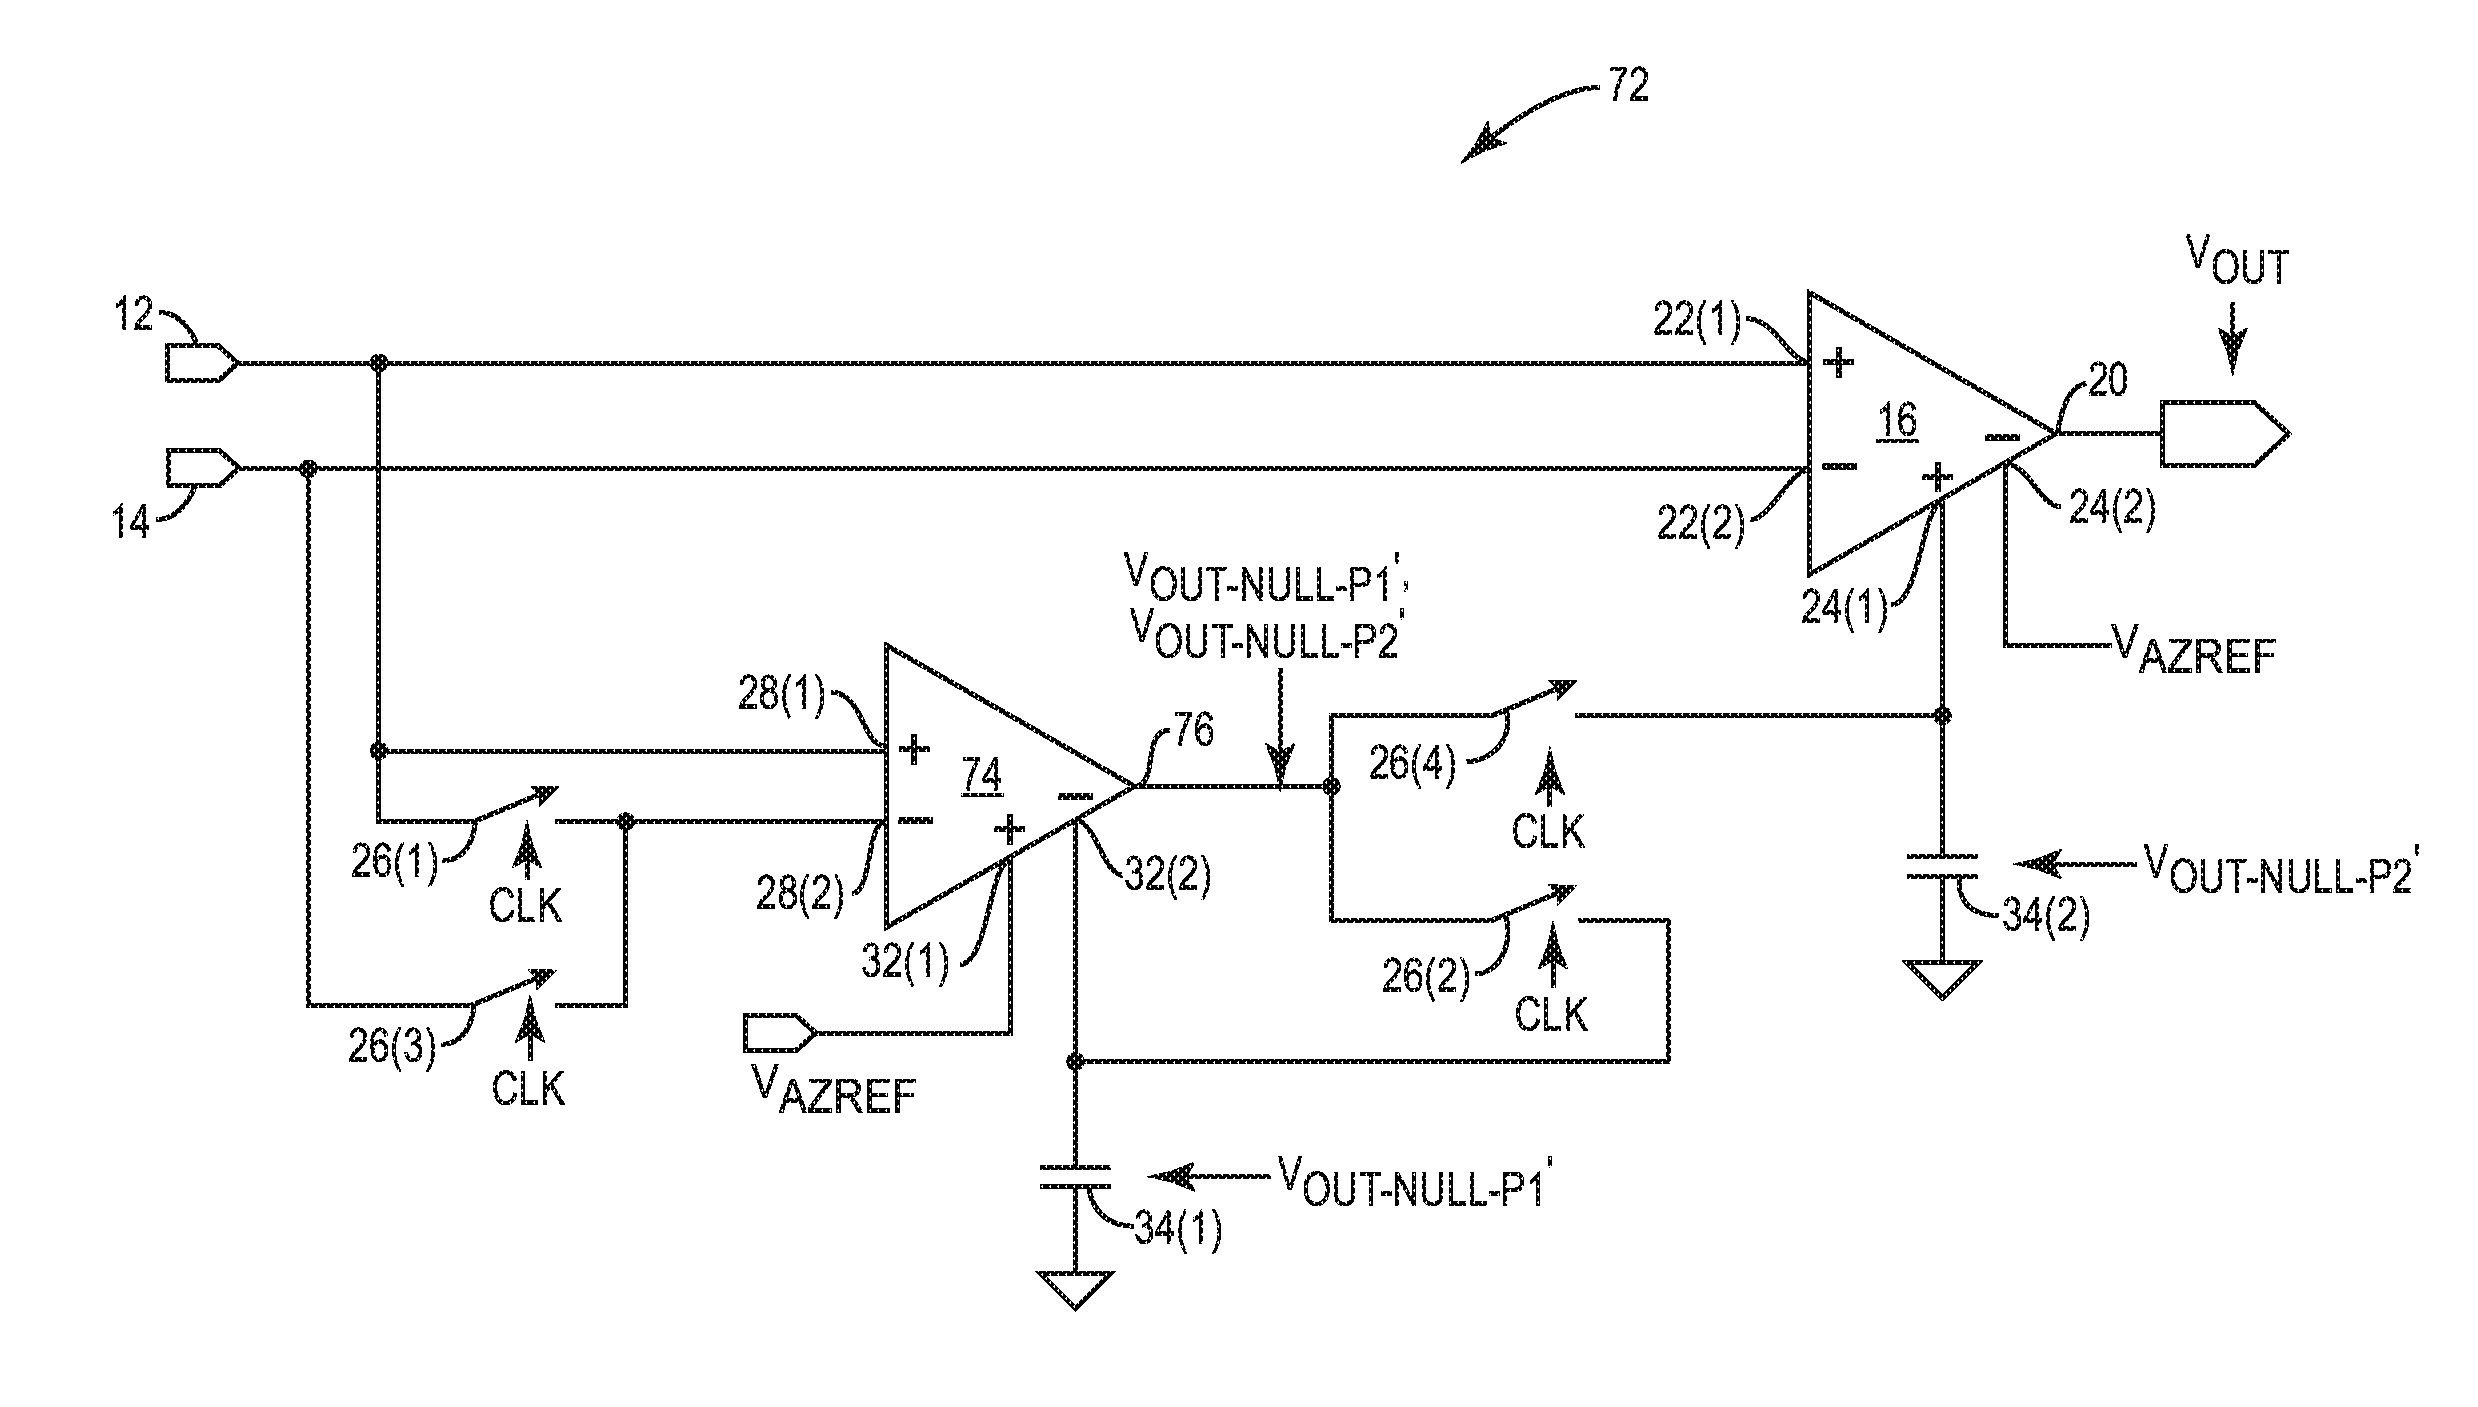 Phase-dependent operational amplifiers employing phase-based frequency compensation, and related systems and methods